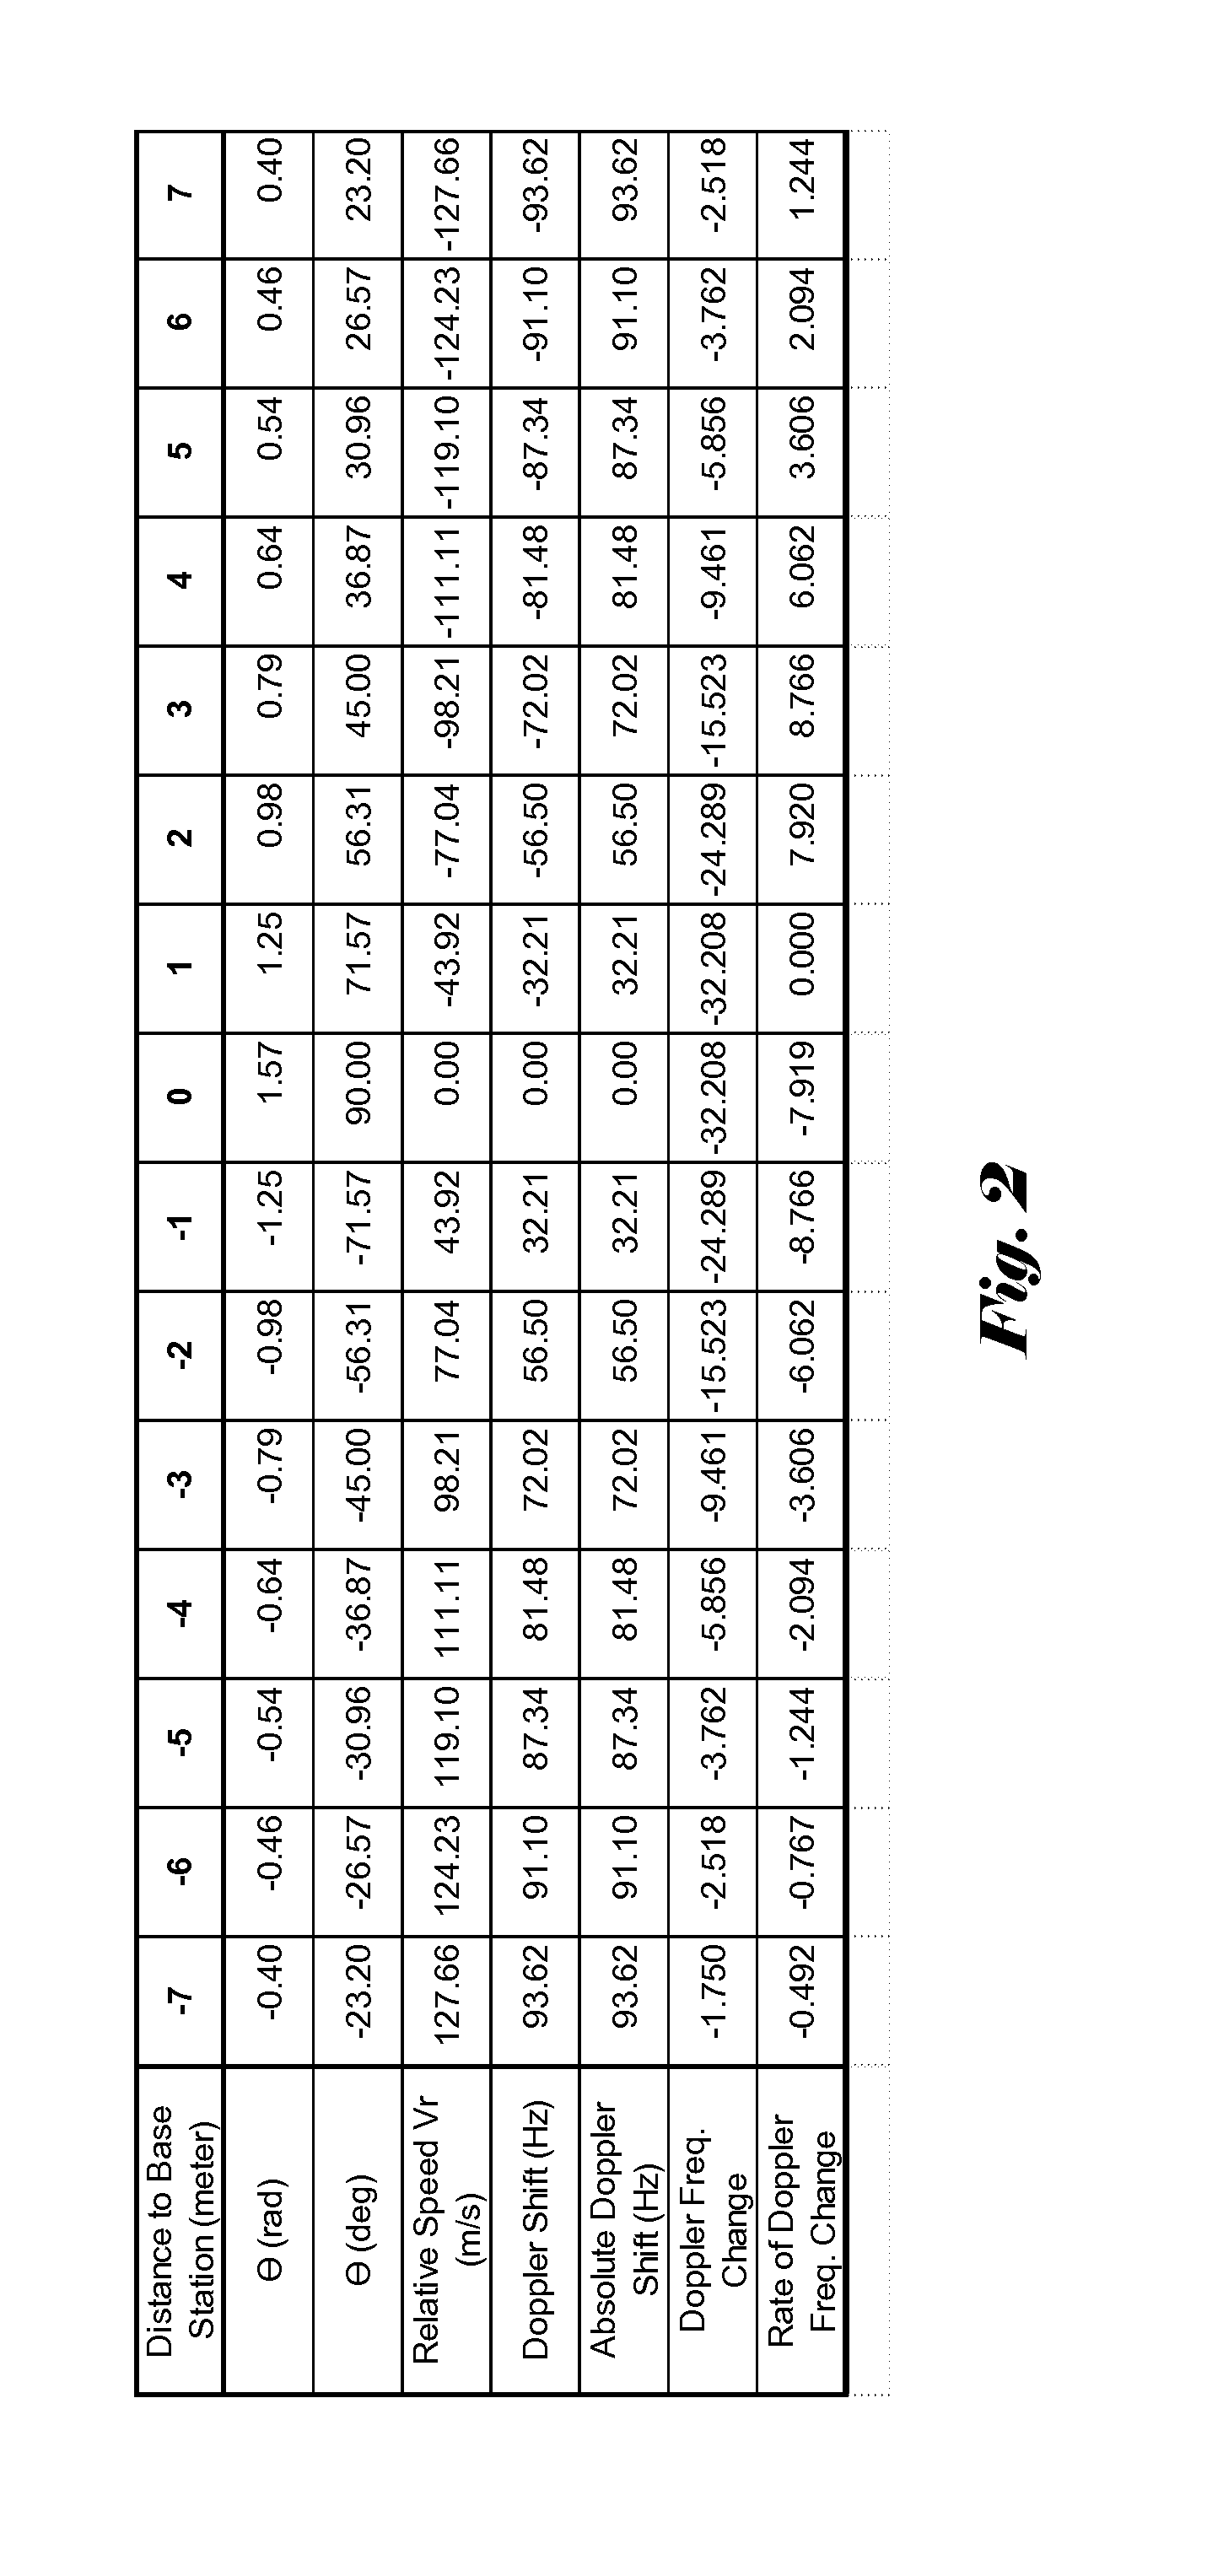 System and method of frequency offset compensation for radio system with fast doppler shift